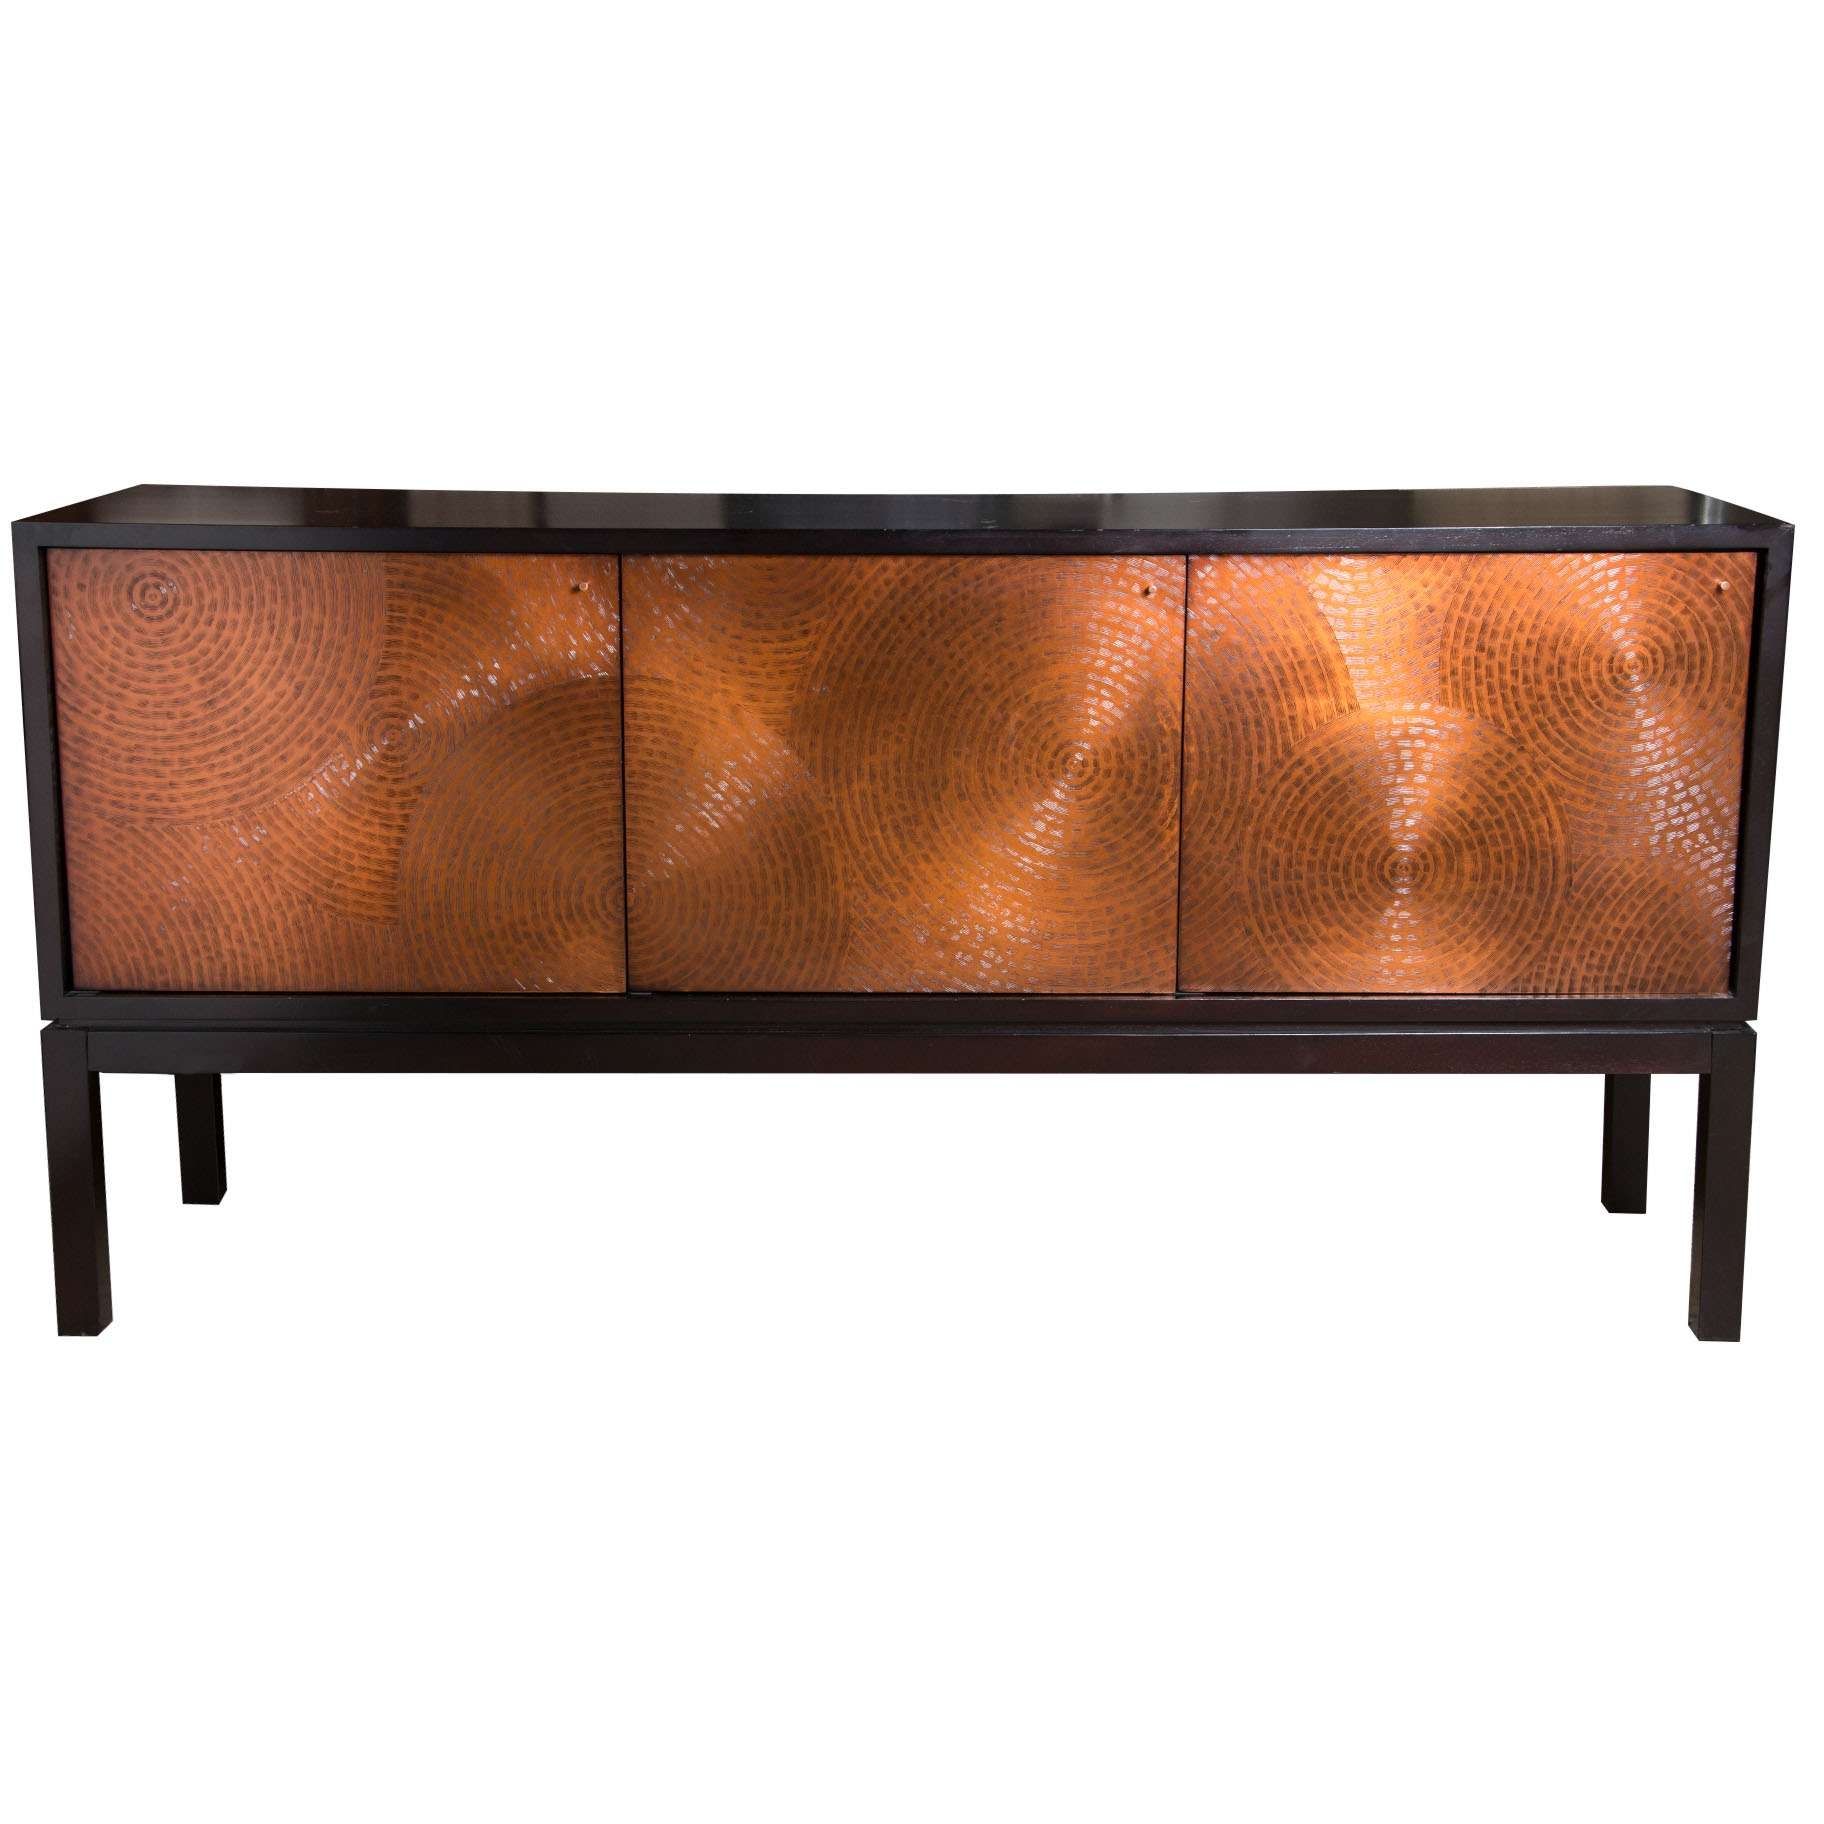 Unique Crate And Barrel Sideboard – Bjdgjy Pertaining To Crate And Barrel Sideboards (View 2 of 20)